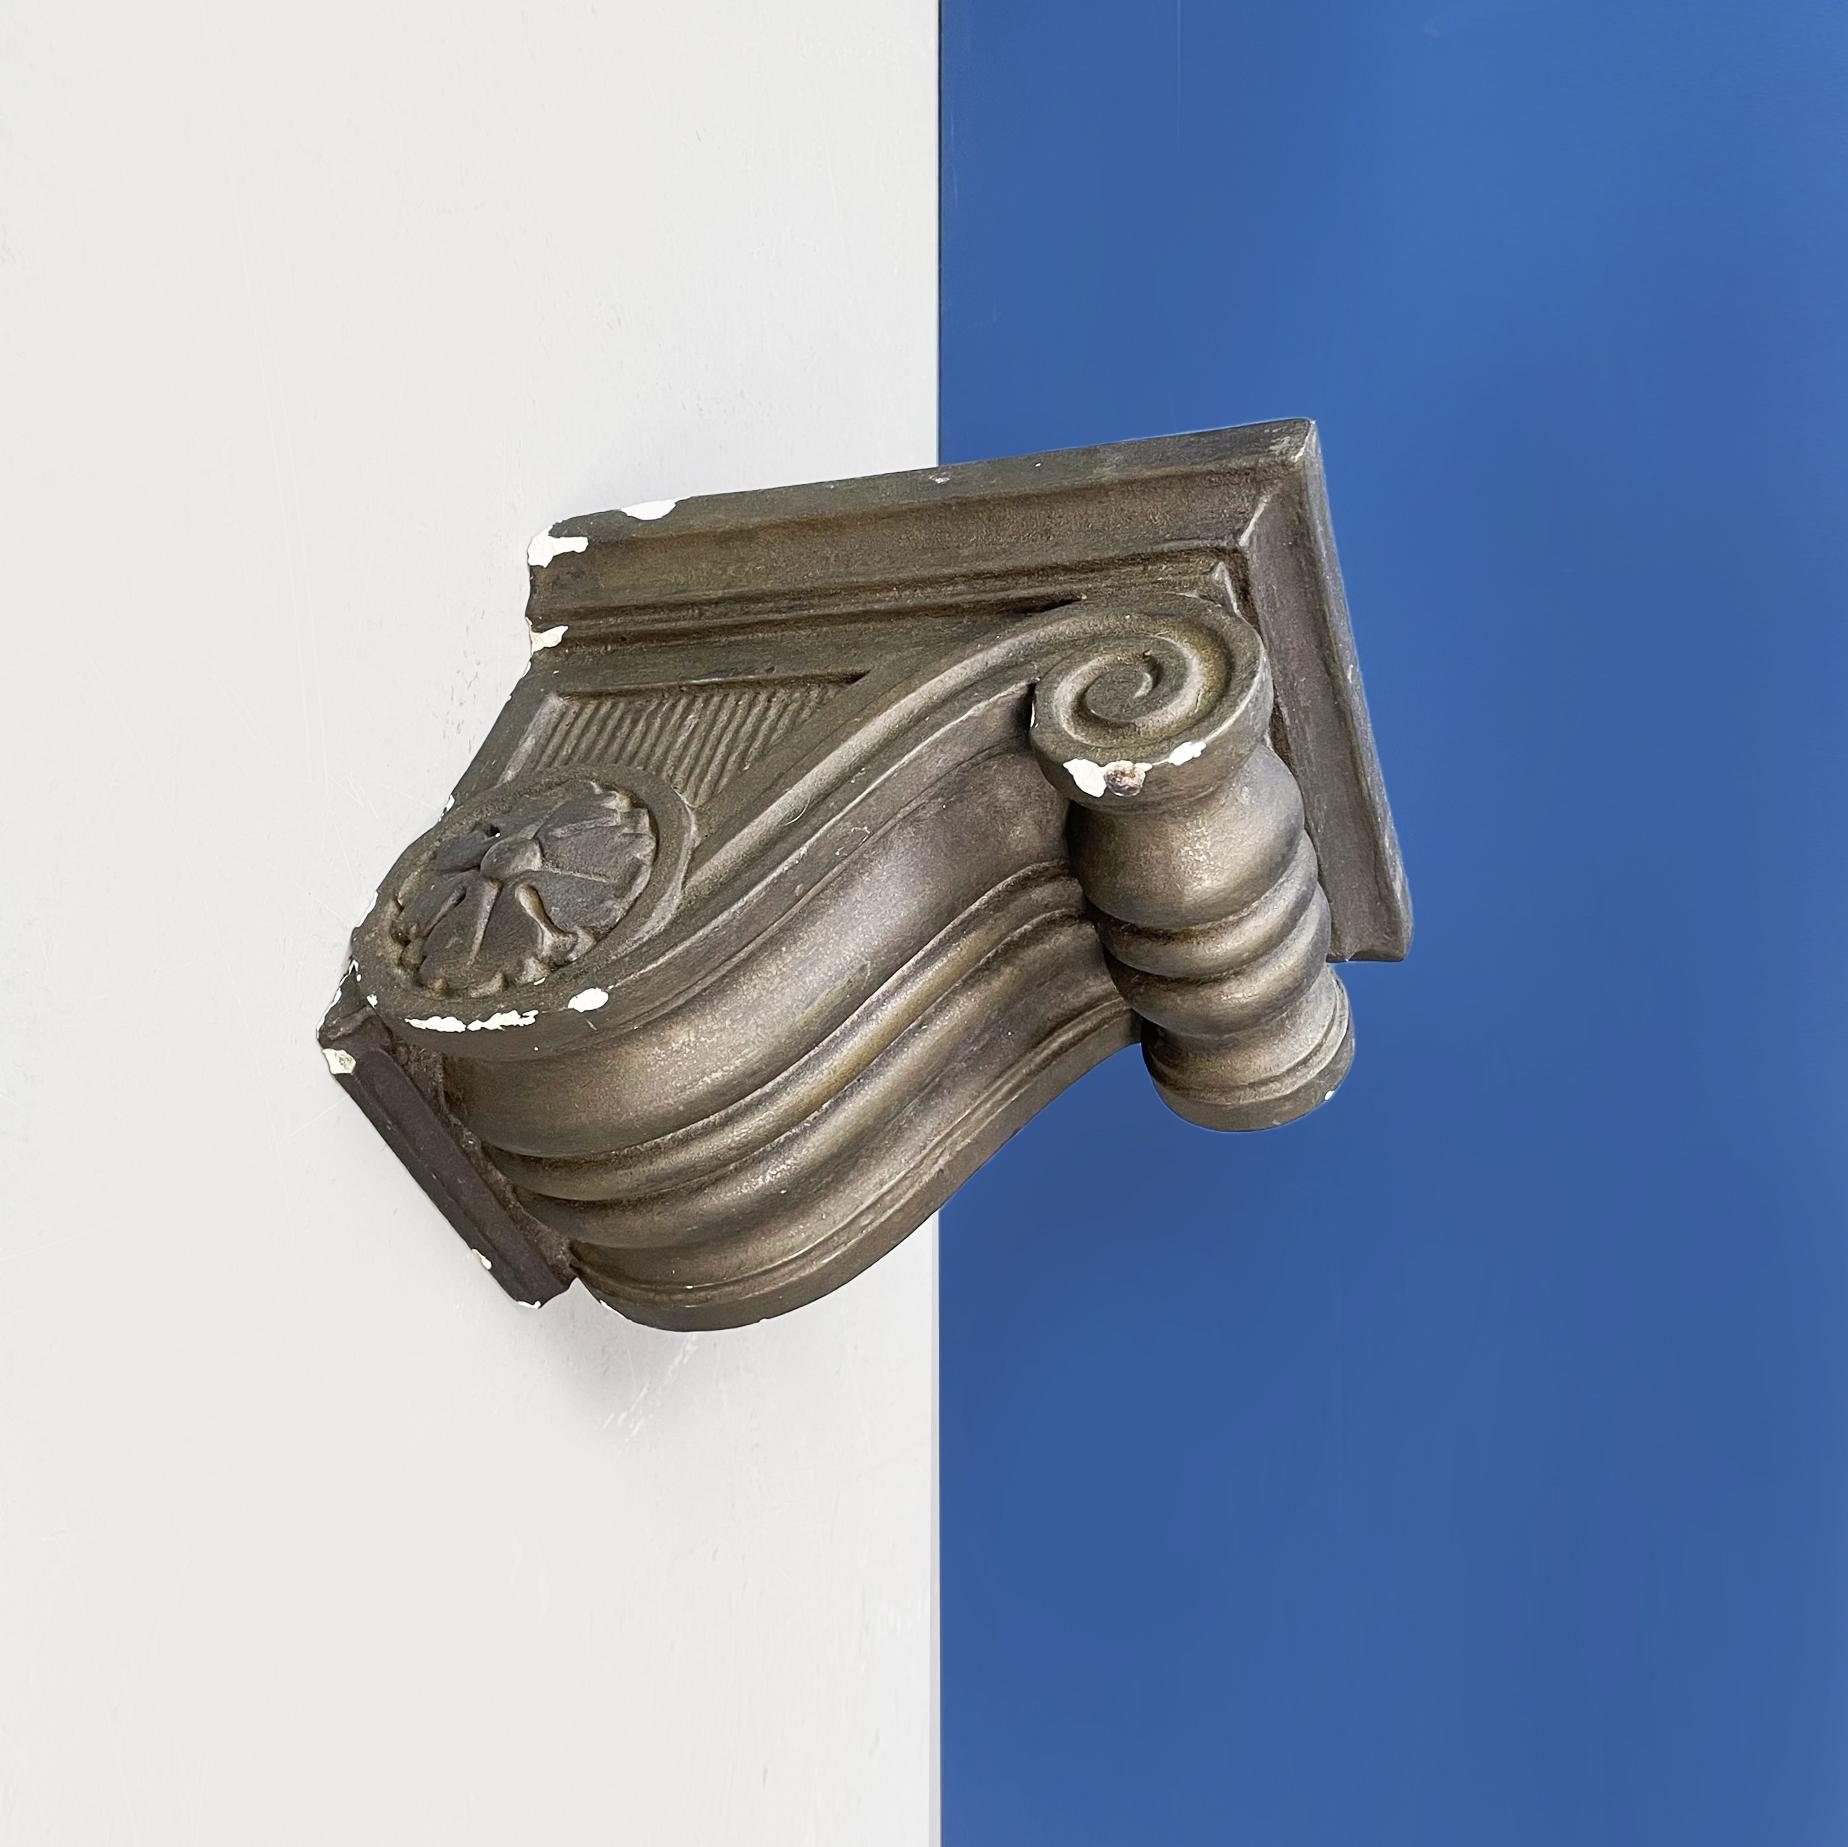 Italian modern finely worked capital in grey plaster, 1990s
Finely worked capital with curls and floral patters, in gray painted plaster. It can be used as a shelf bracket. 
1990s
Good conditions, it has some lacks.
Measurements in cm 20 x 25 x